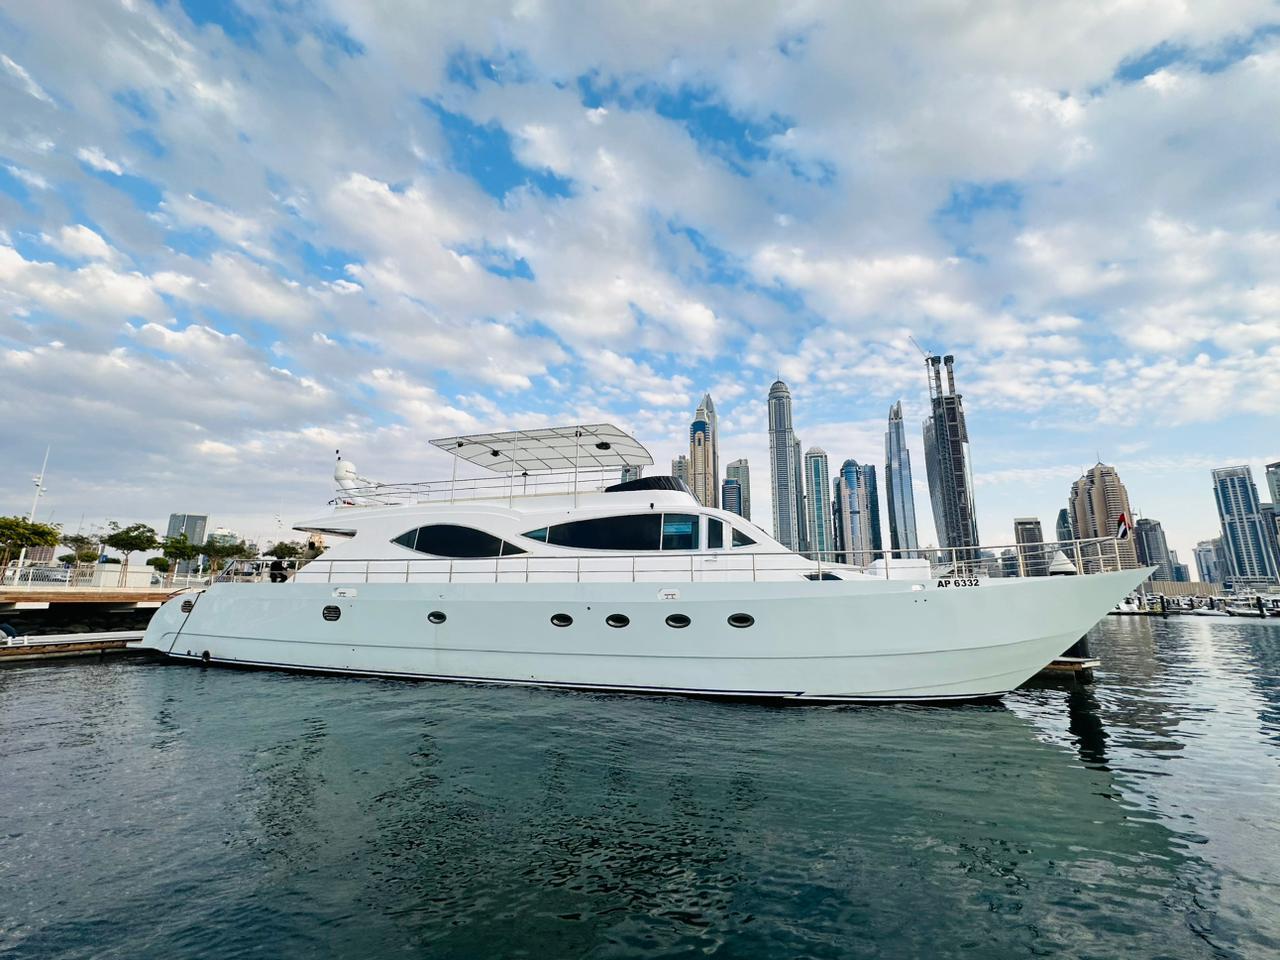 Boat Rental near me Dubai | Exclusive Yacht Charter, Hire Party Boat |  Bookanyboat